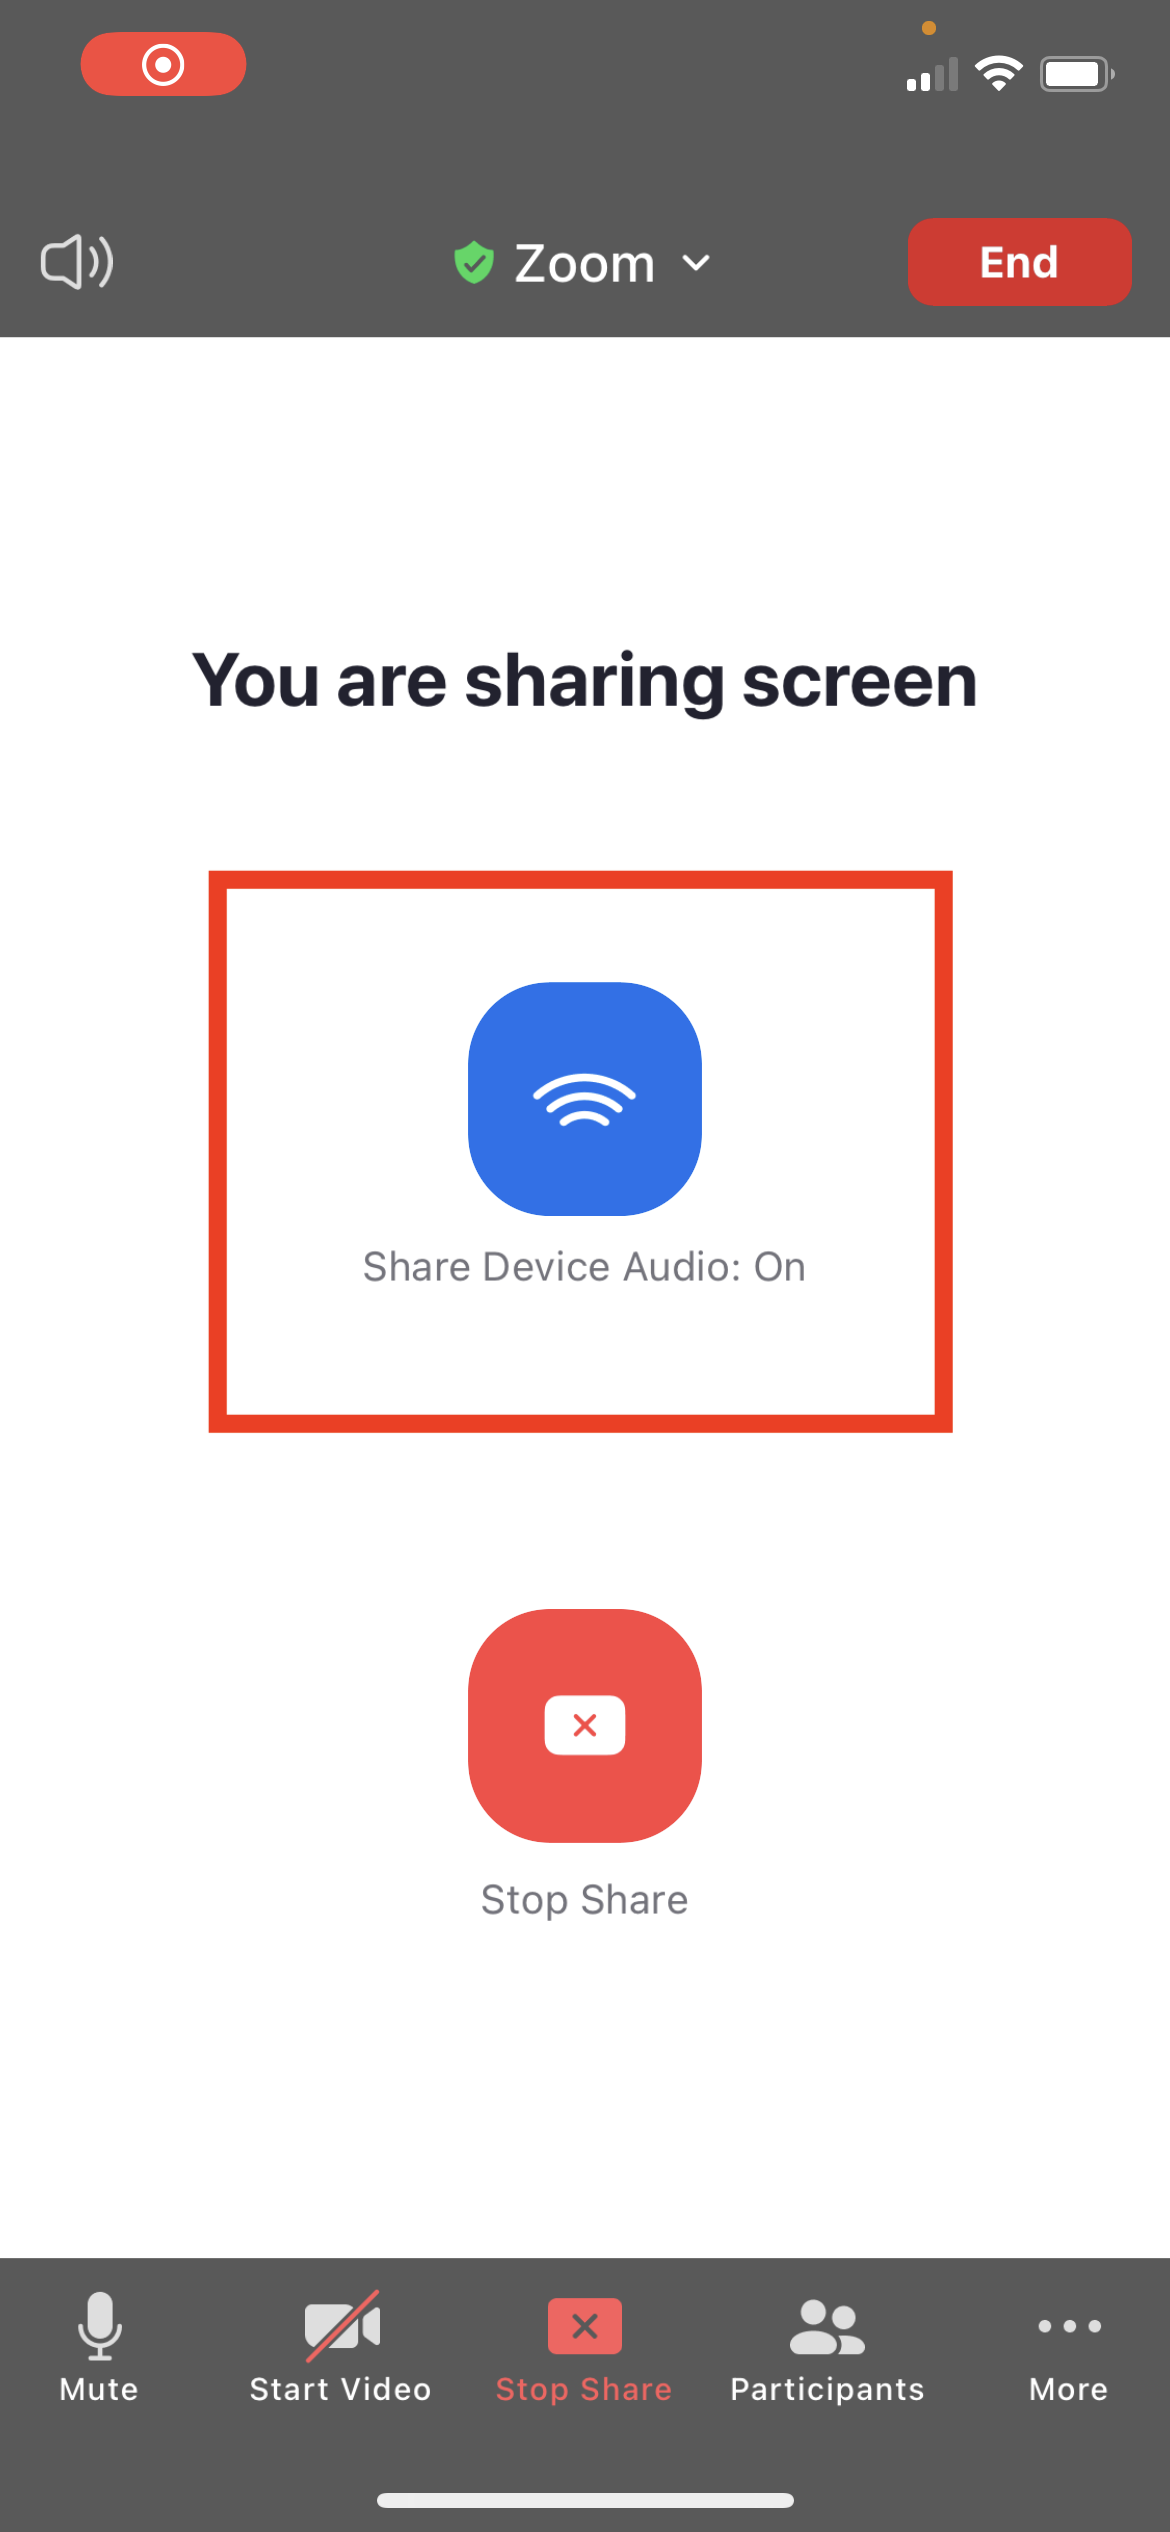 Zoom_iOS_You're sharing your screen.png